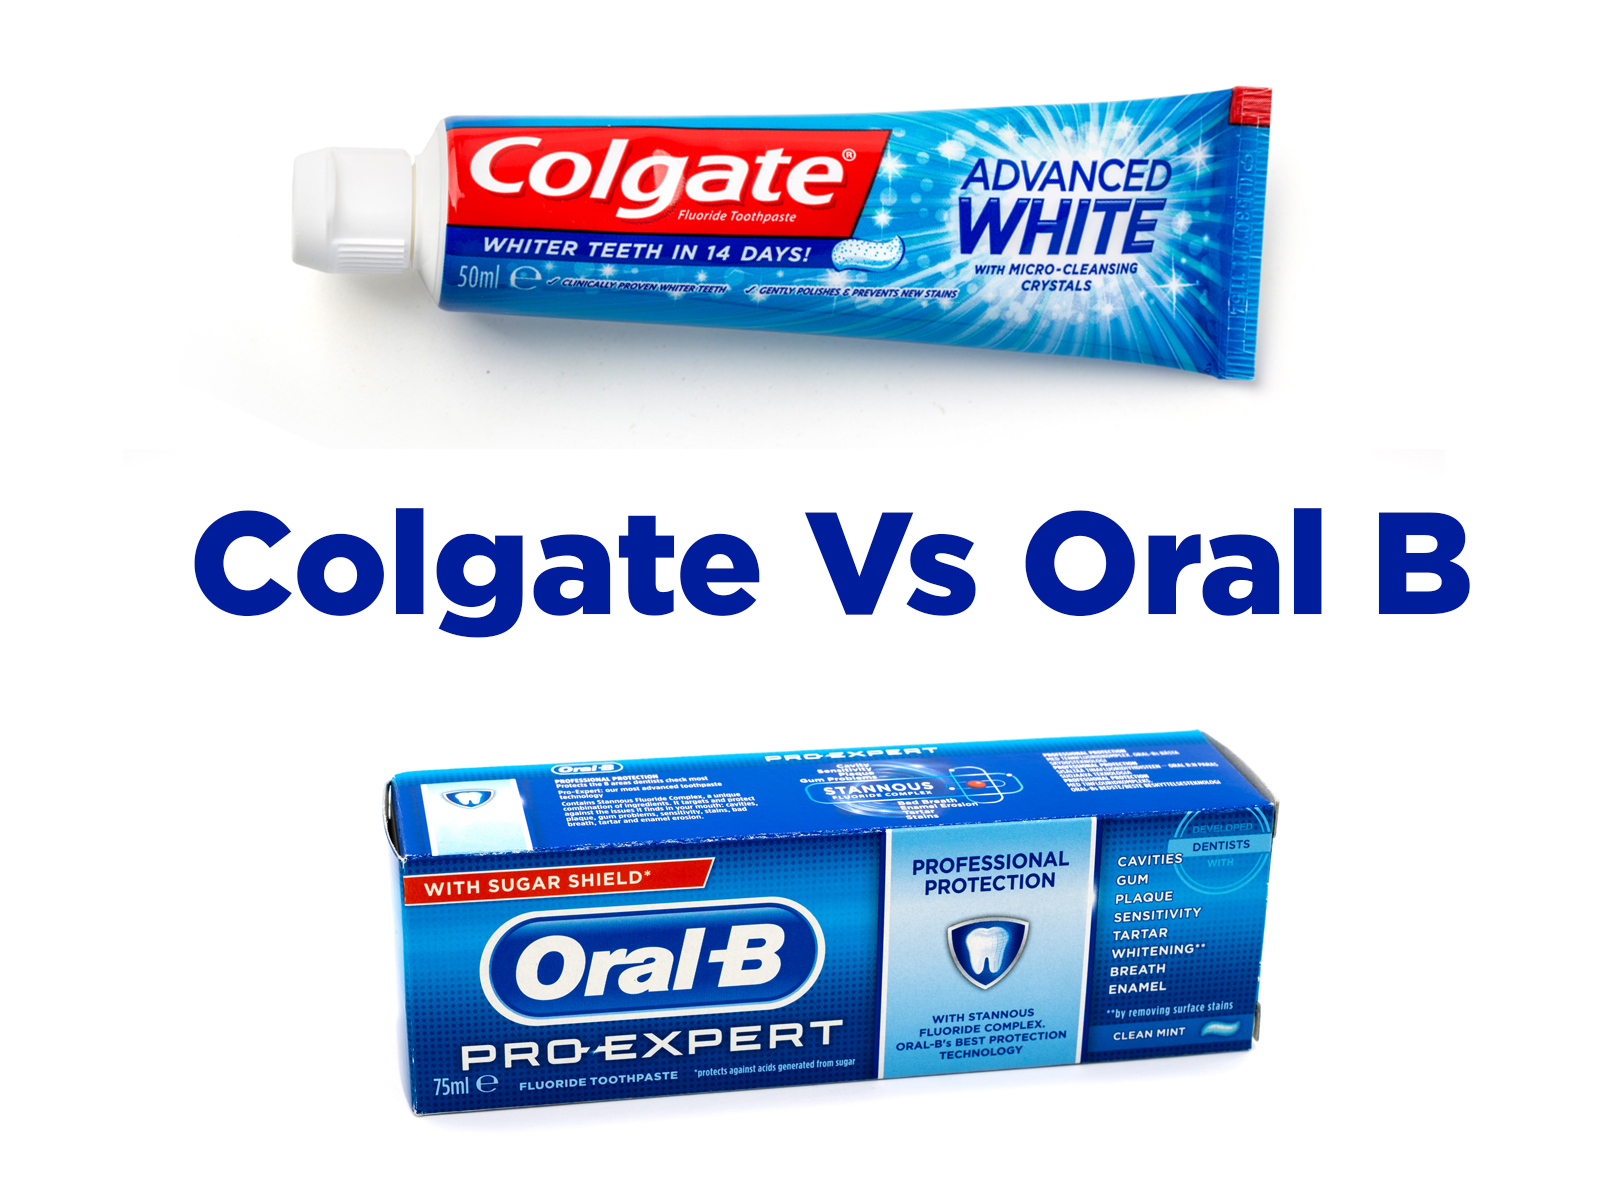 What’s better Colgate or Oral B?